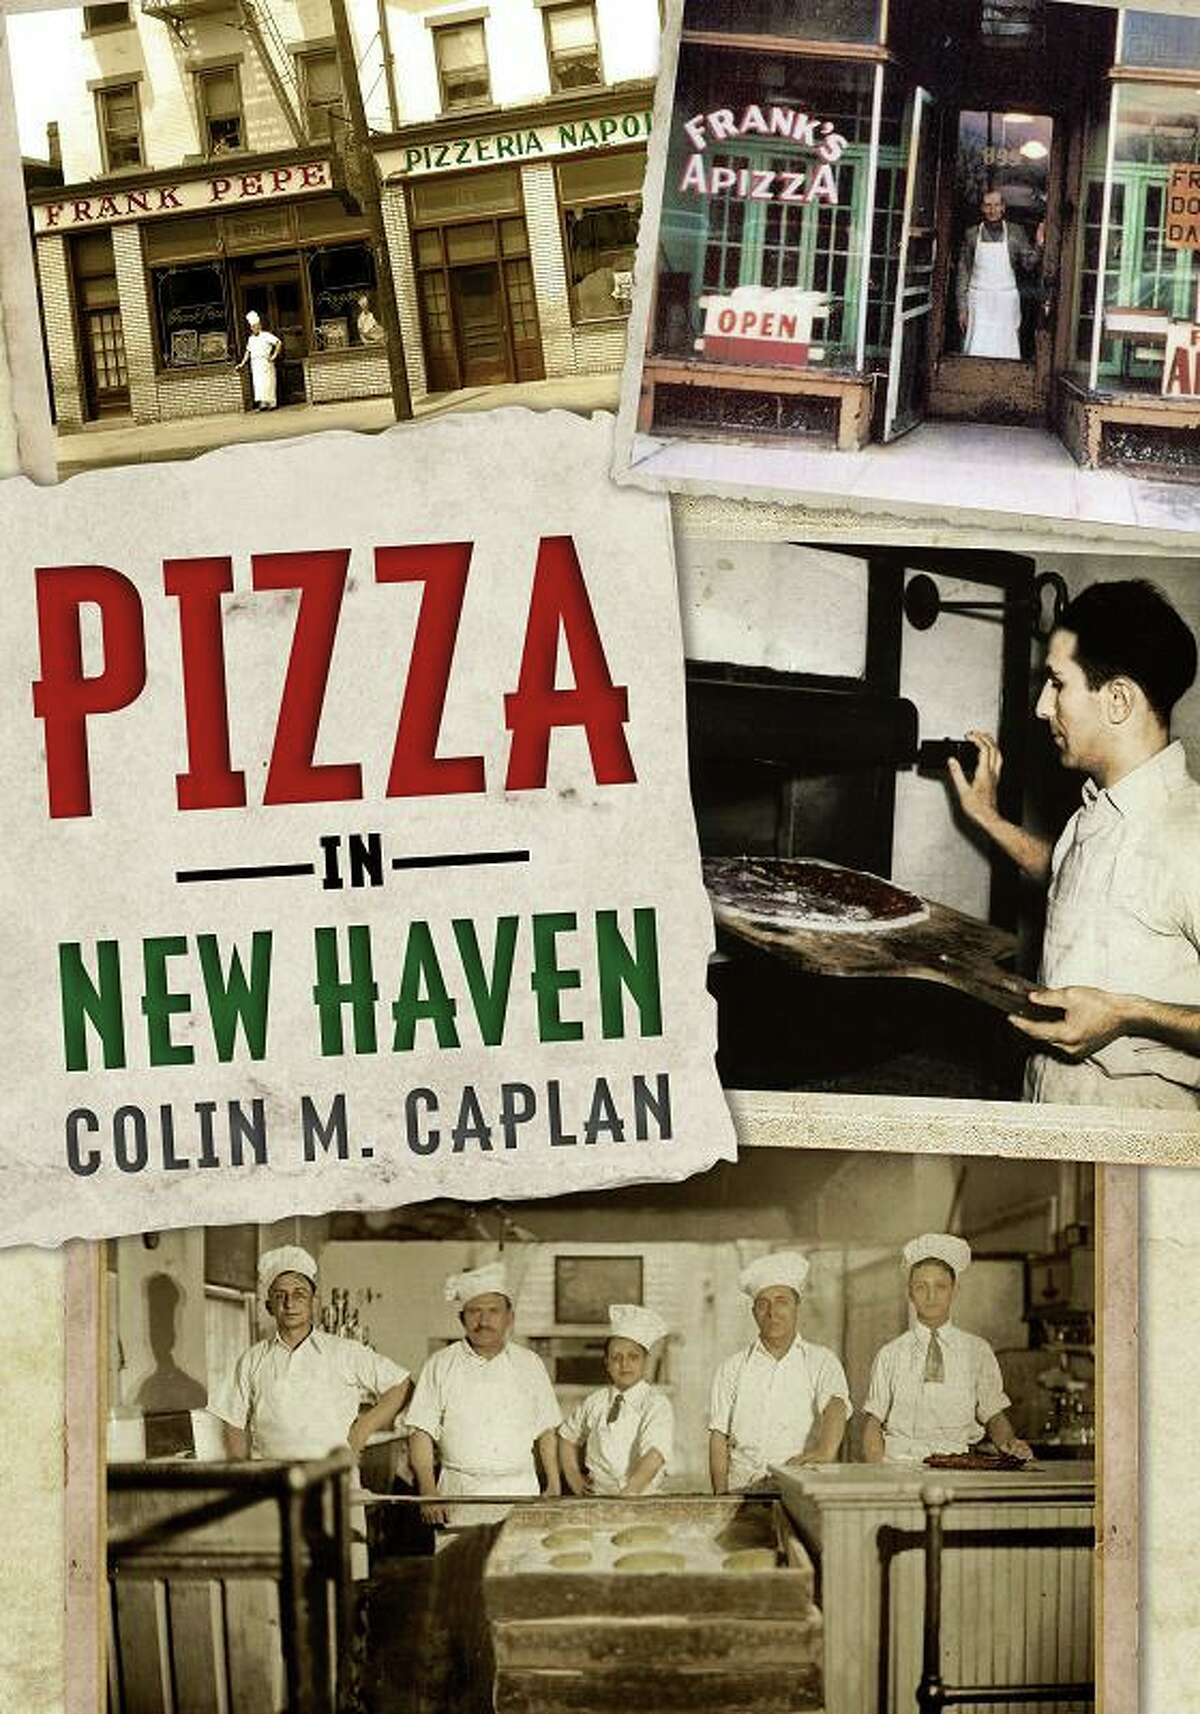 The cover of “Pizza in New Haven,” by Colin Caplan